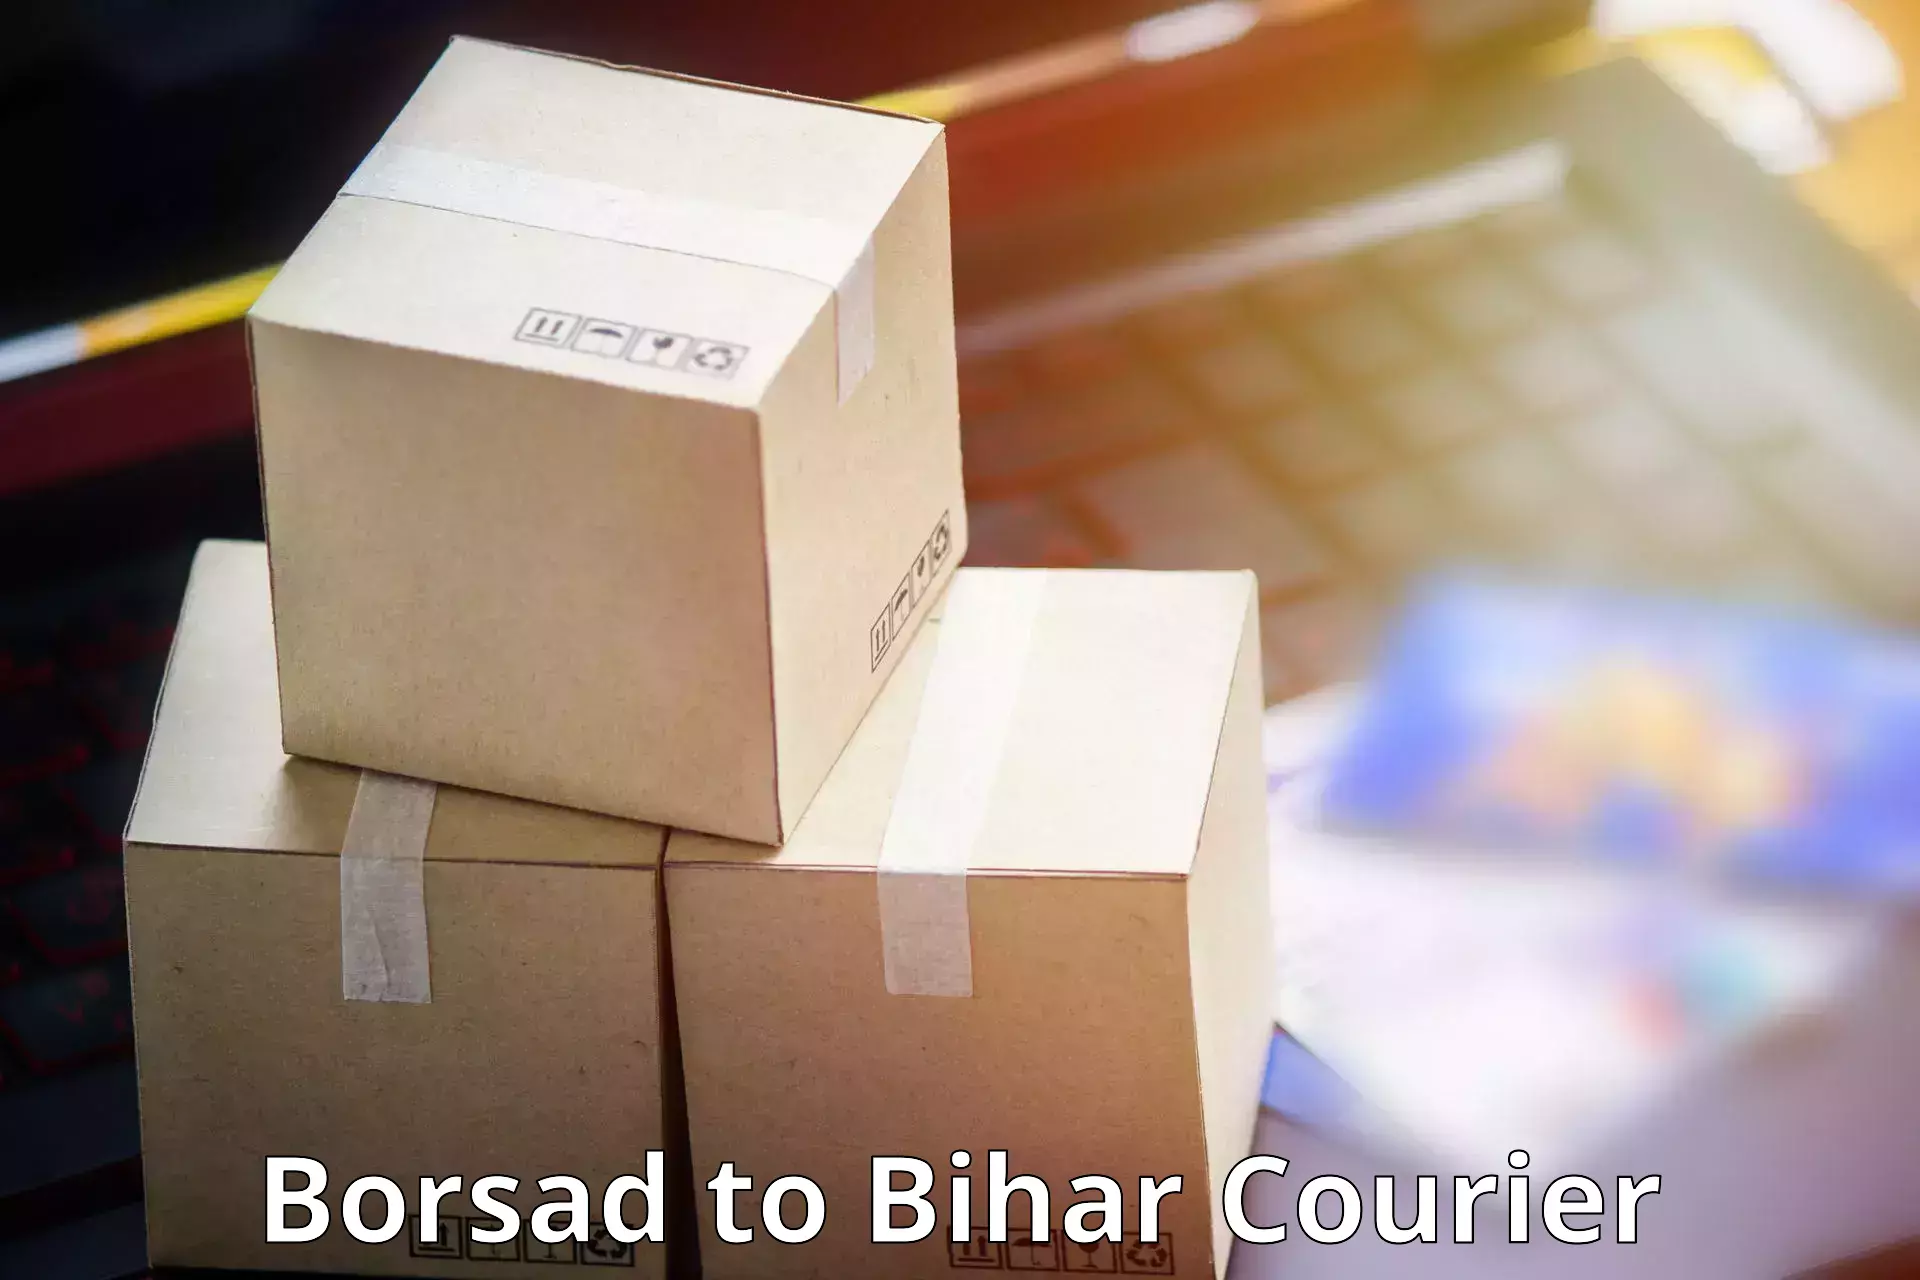 Quality courier services in Borsad to Bhabua